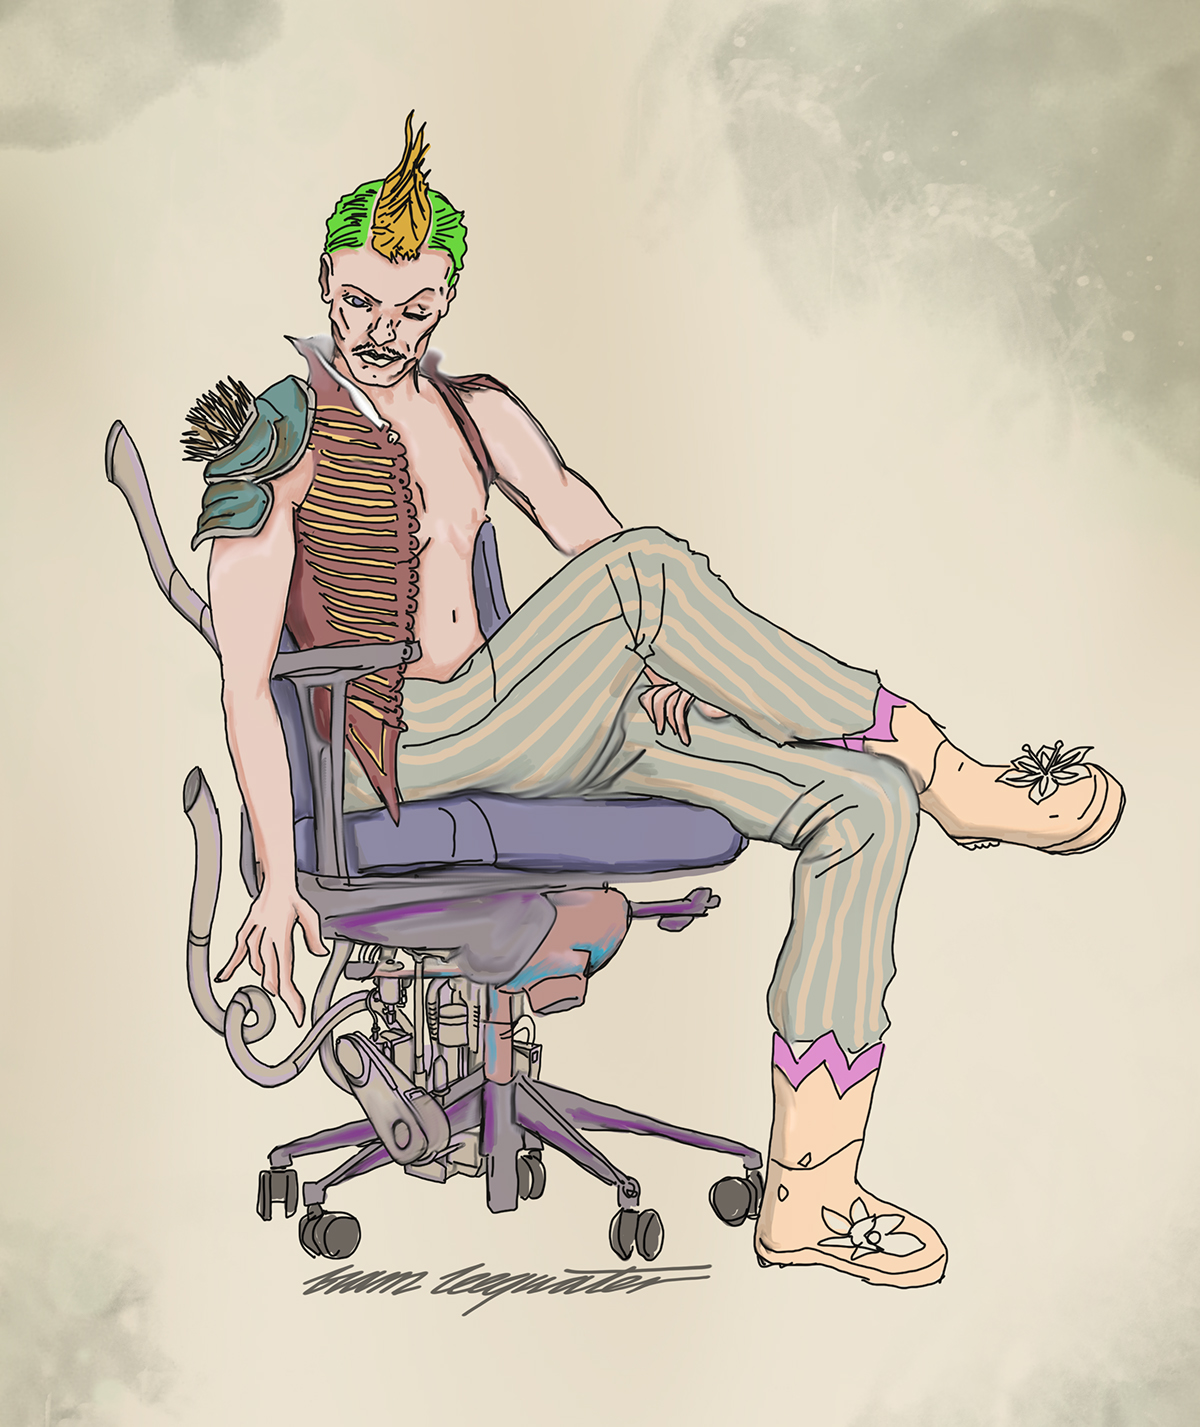 Mad Max Fury road Mad Max concept art funny Office funny office art bram leegwater at the office Funny illustrations wacom illustrations served